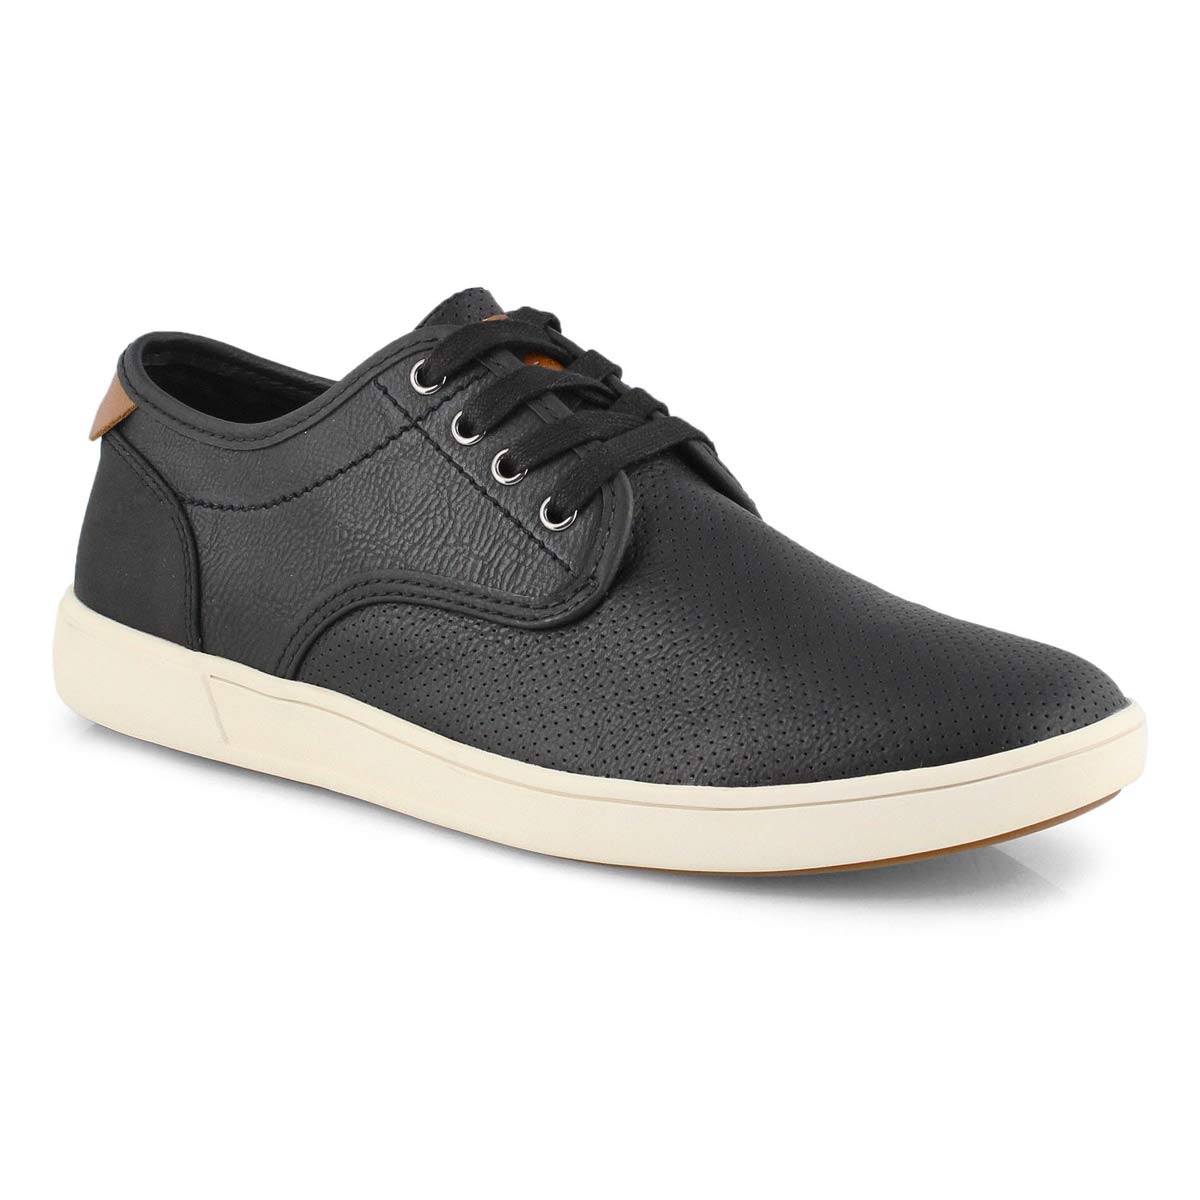 Steve Madden Men's Flanker Lace Up Casual Sne | SoftMoc.com